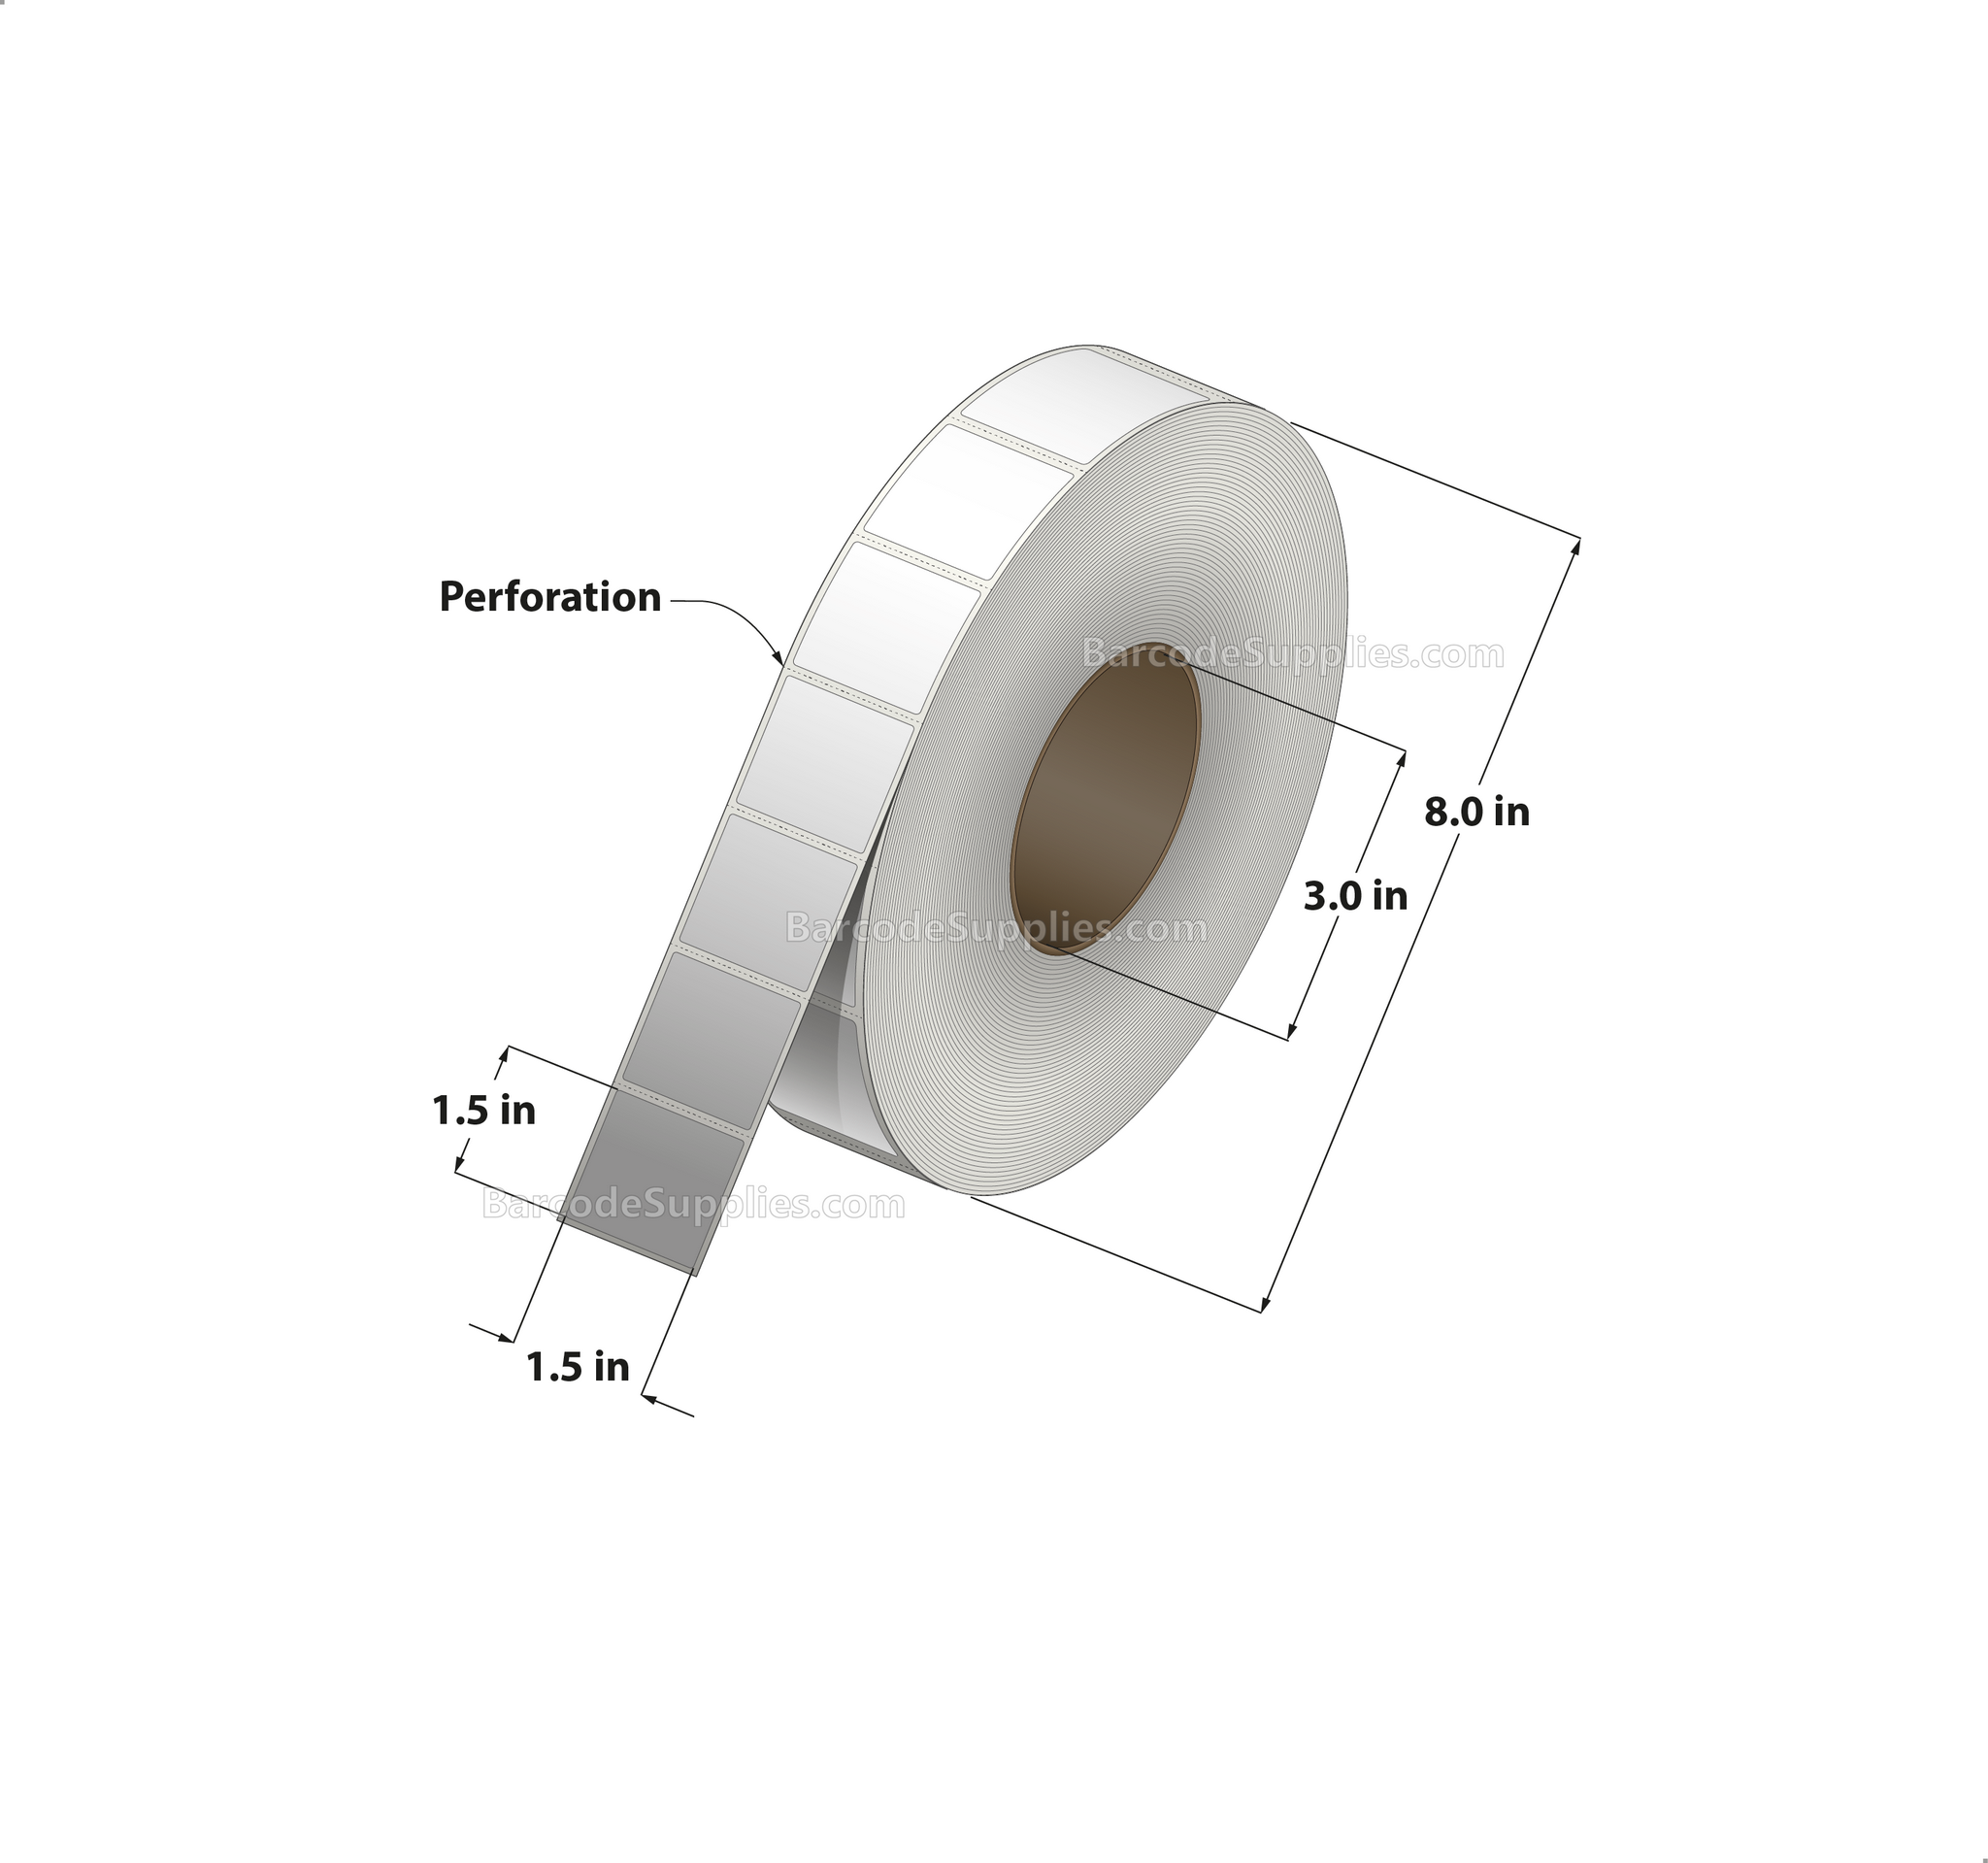 1.5 x 1.5 Direct Thermal White Labels With Acrylic Adhesive - Perforated - 3600 Labels Per Roll - Carton Of 8 Rolls - 28800 Labels Total - MPN: RD-15-15-3600-3 - BarcodeSource, Inc.